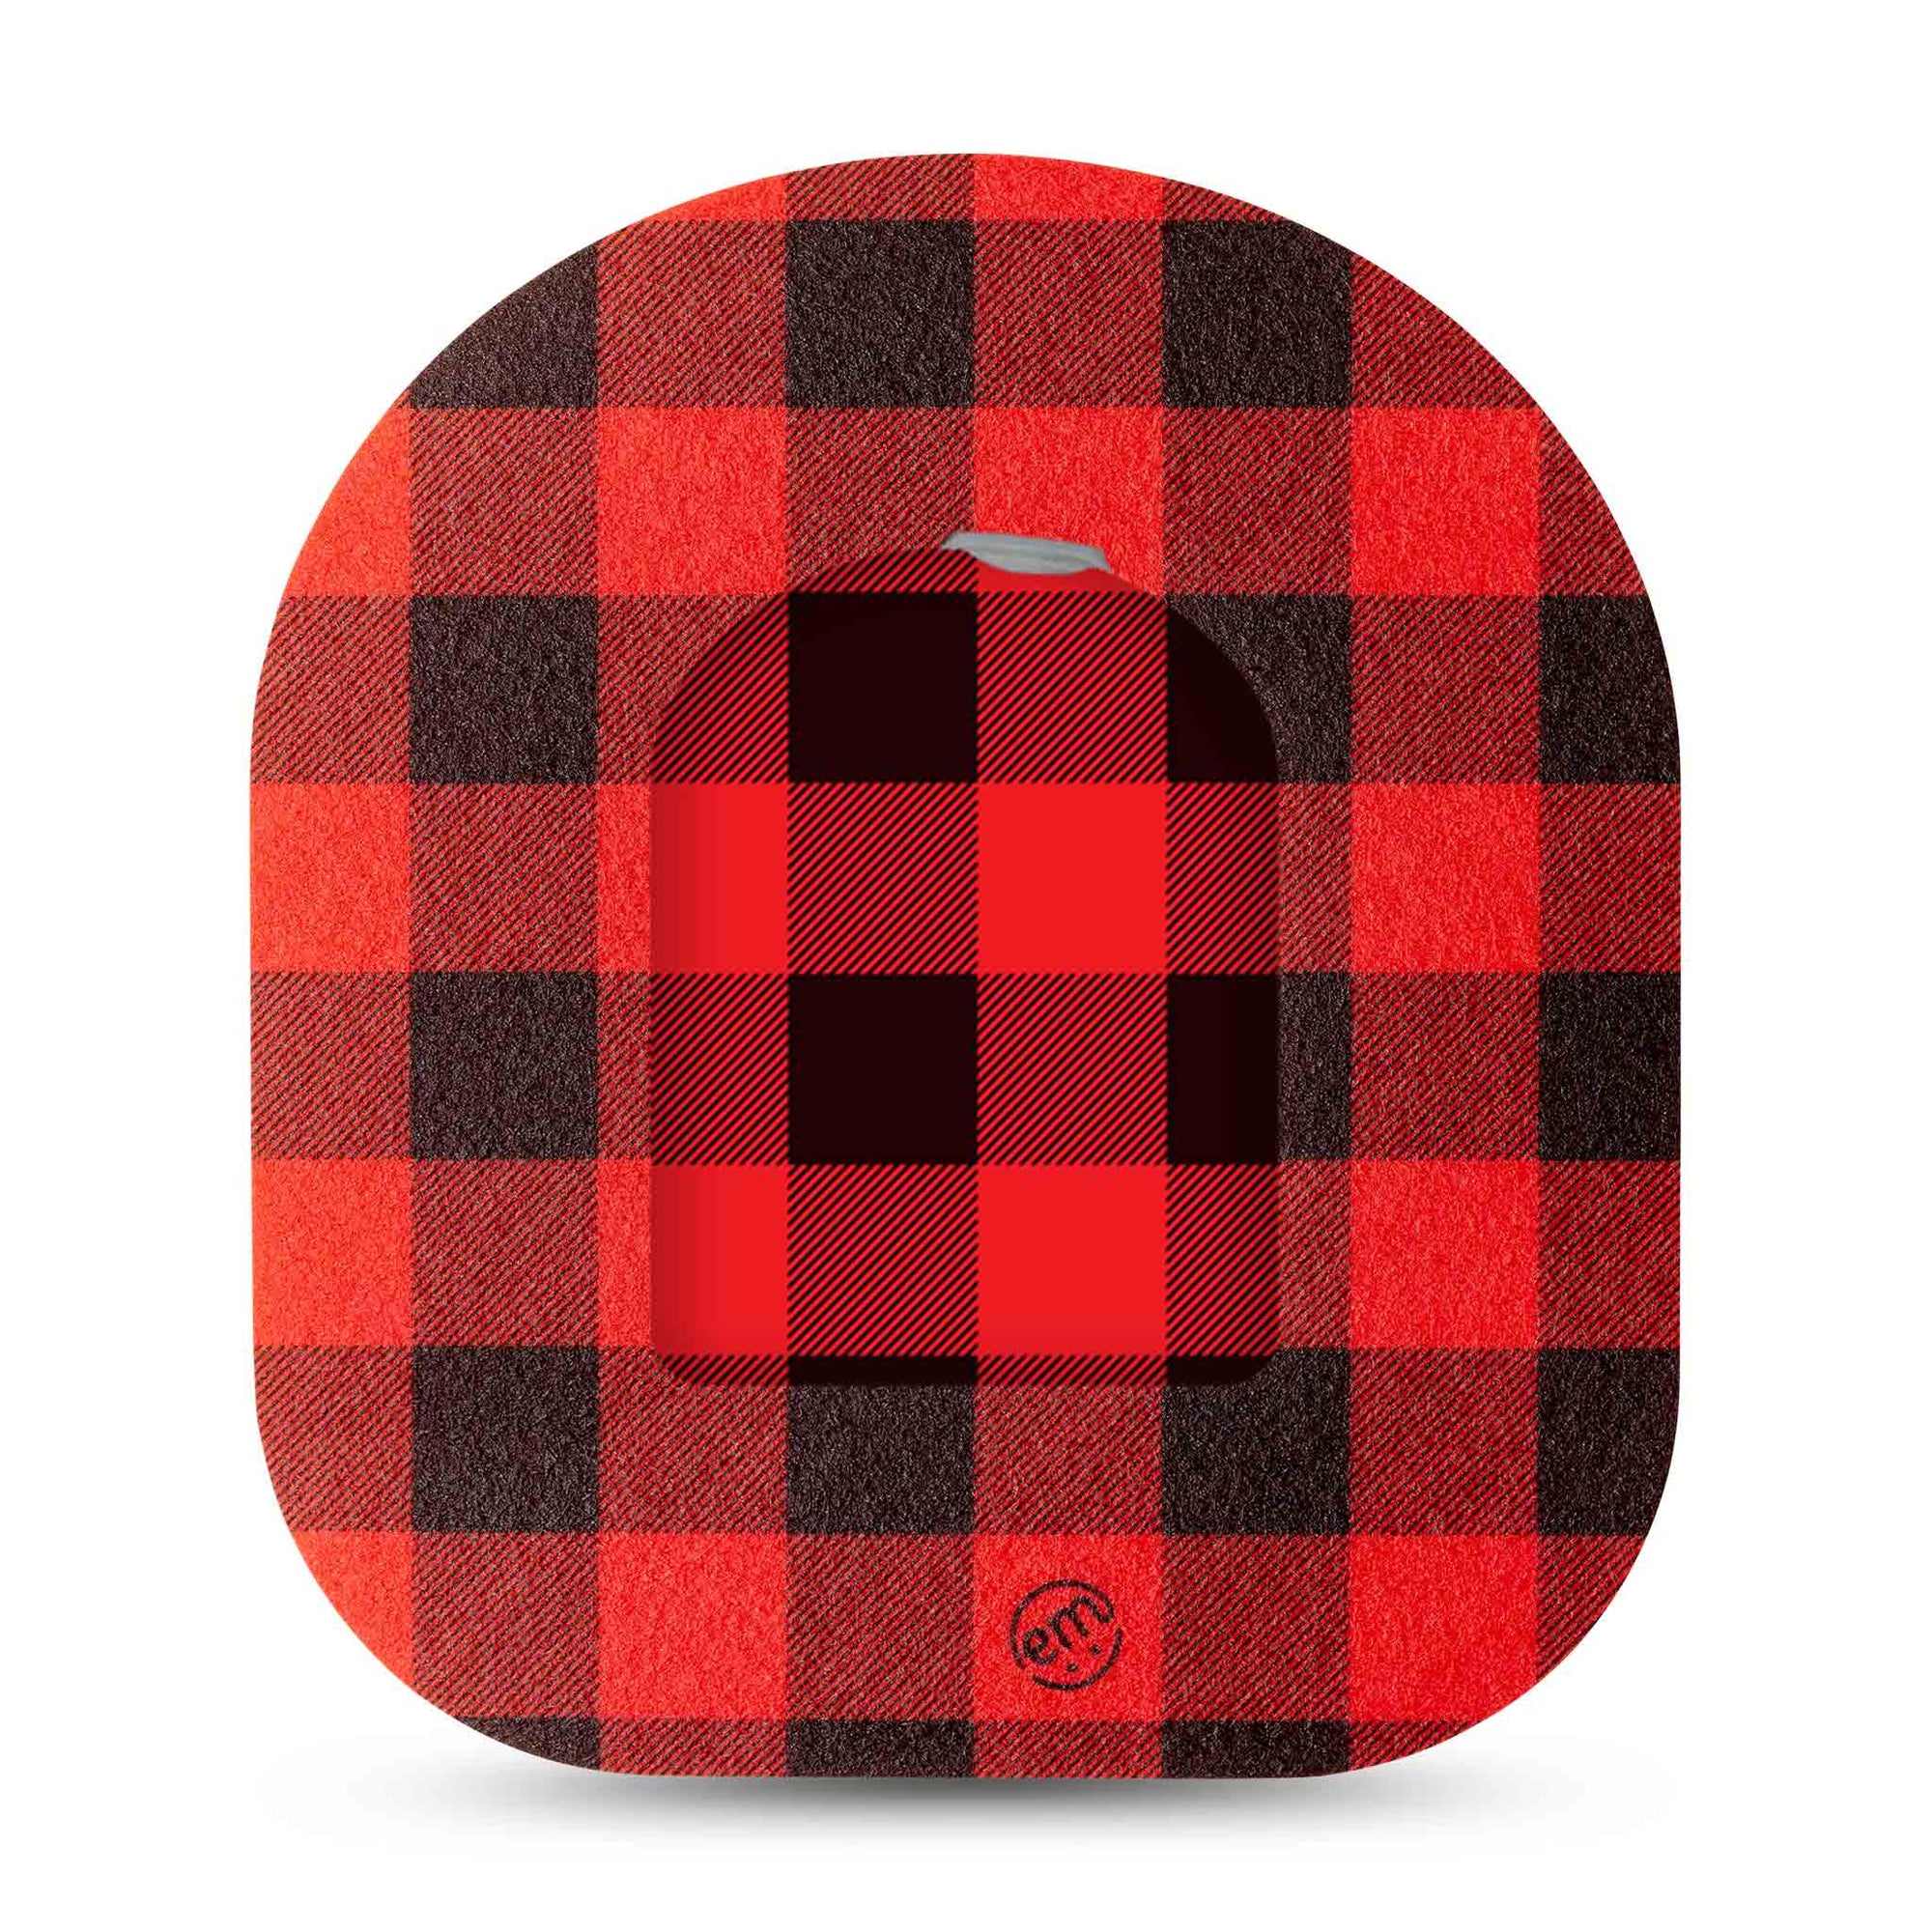 ExpressionMed Lumberjack Pod Transmitter Sticker with Tape